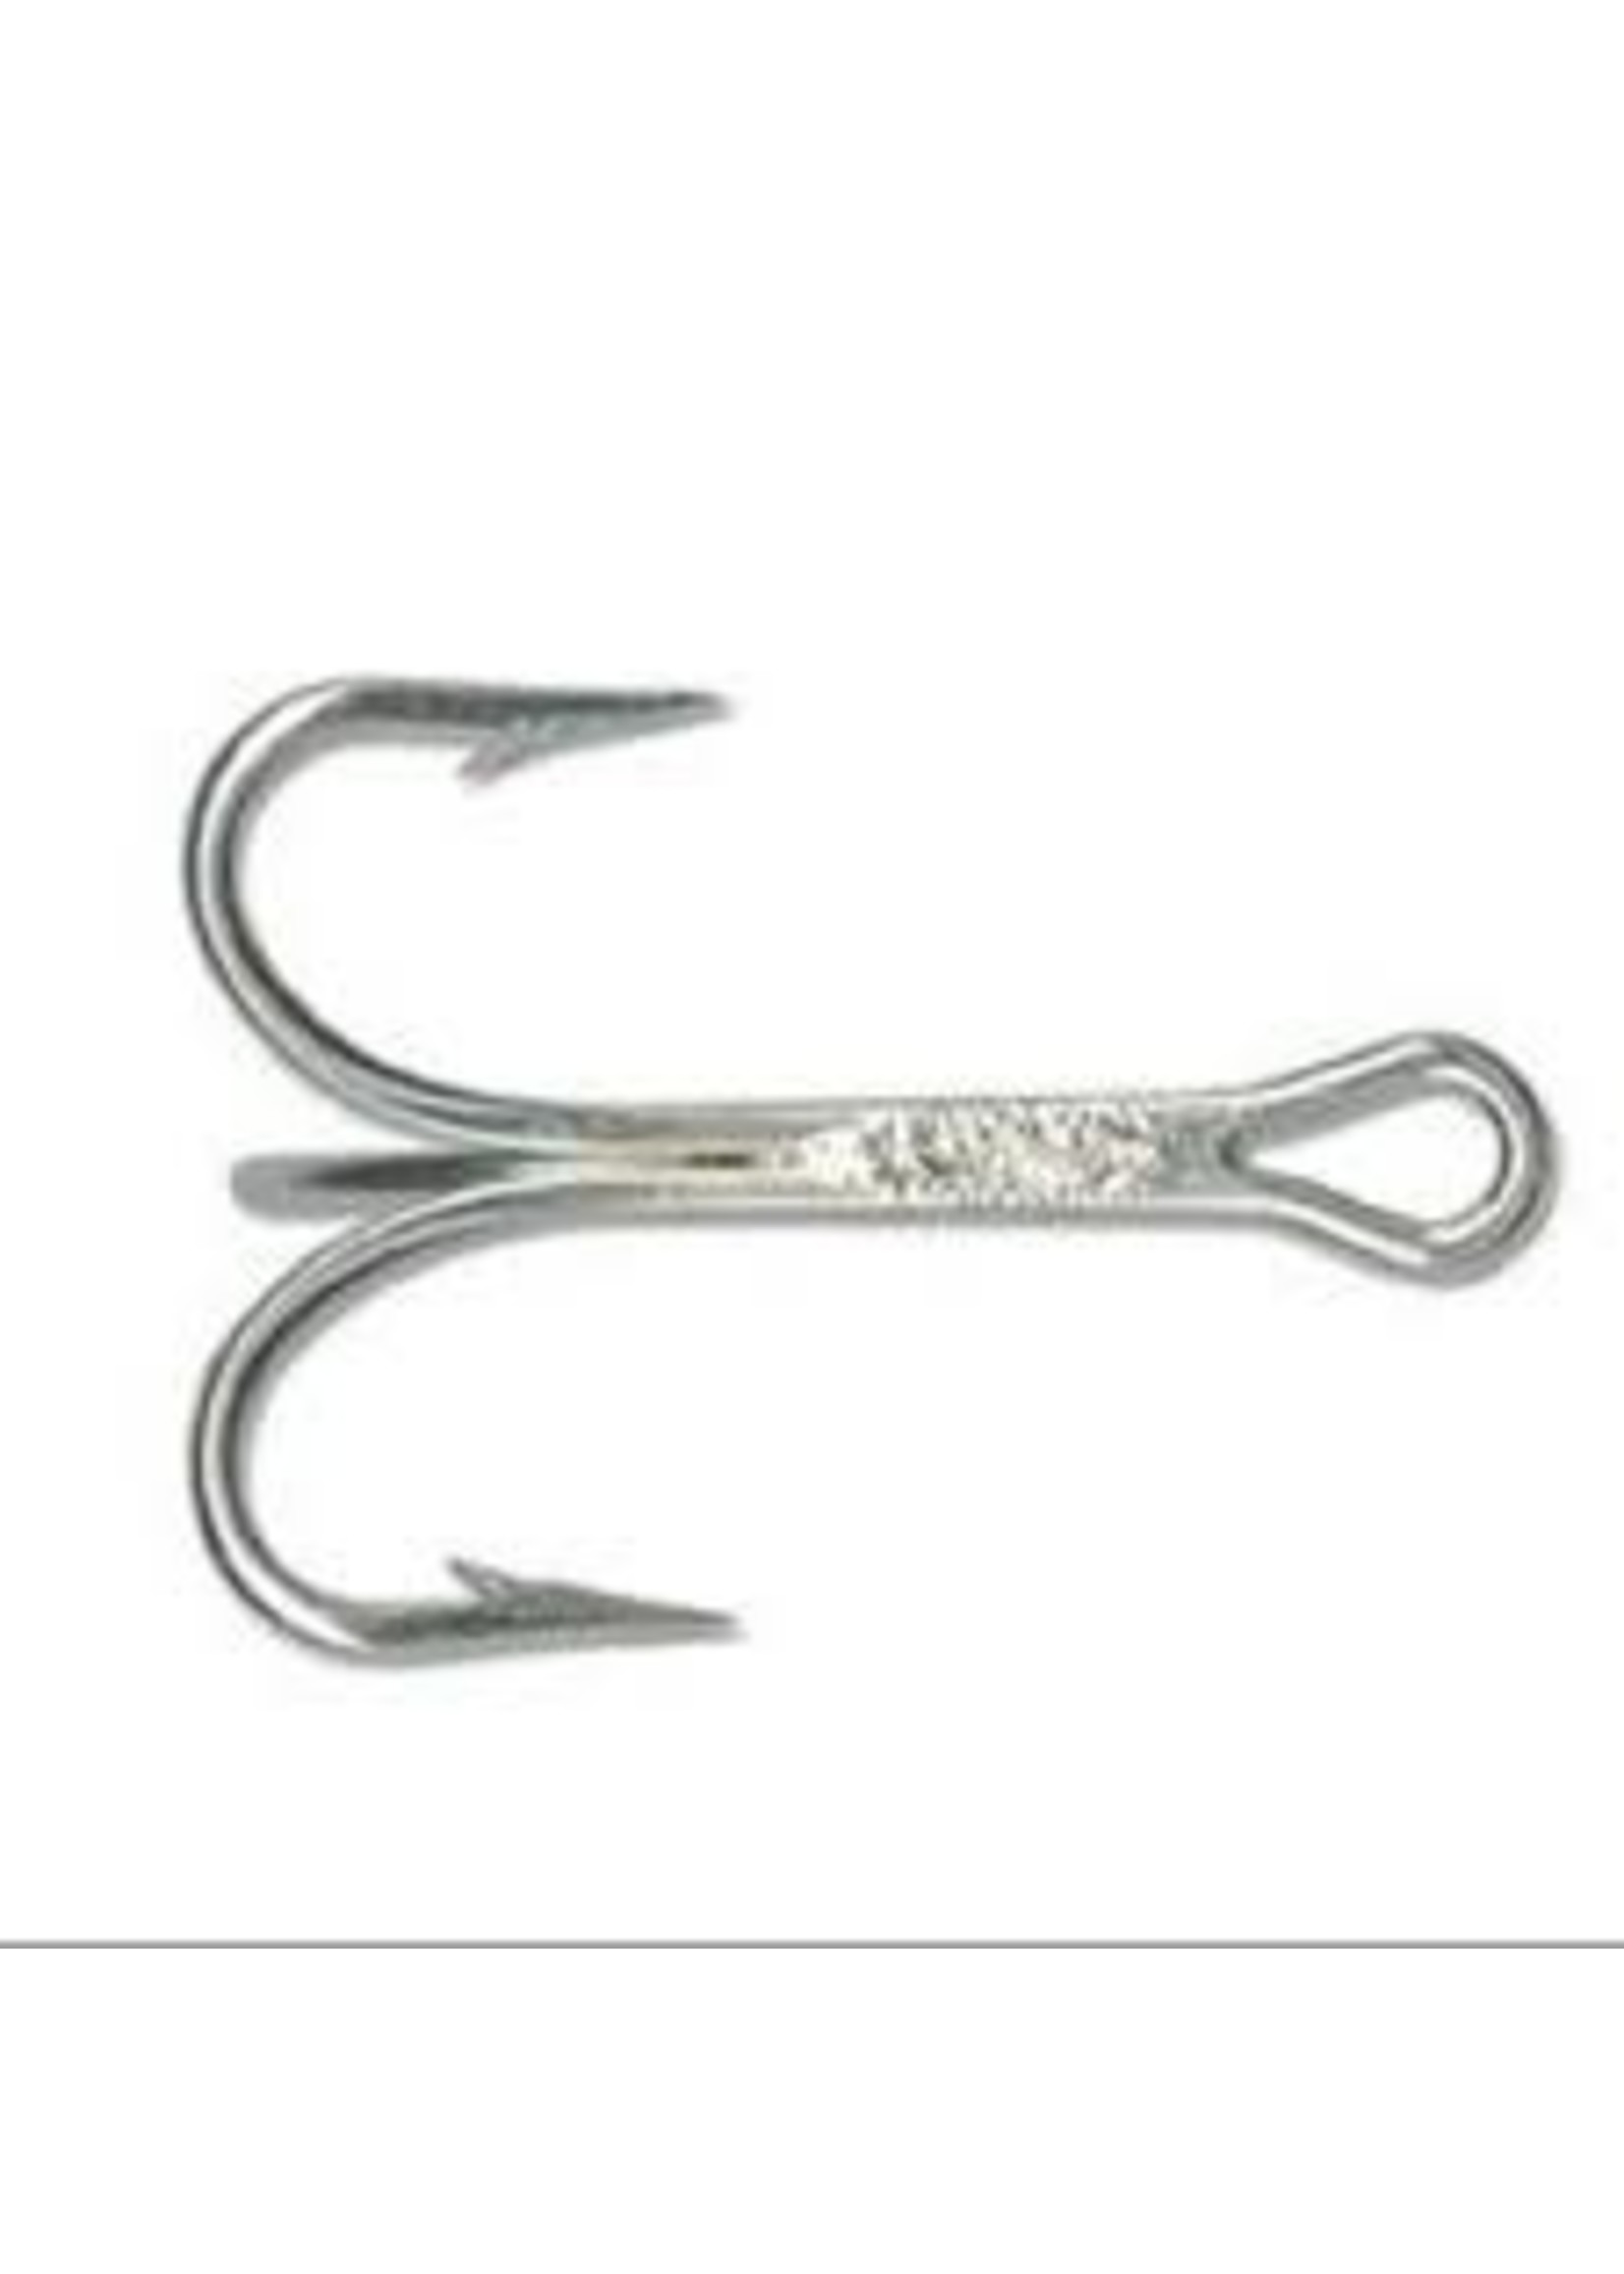 MUSTAD TREBLE HOOK - 3 EXTRA STRONG 5/0 CLASSIC